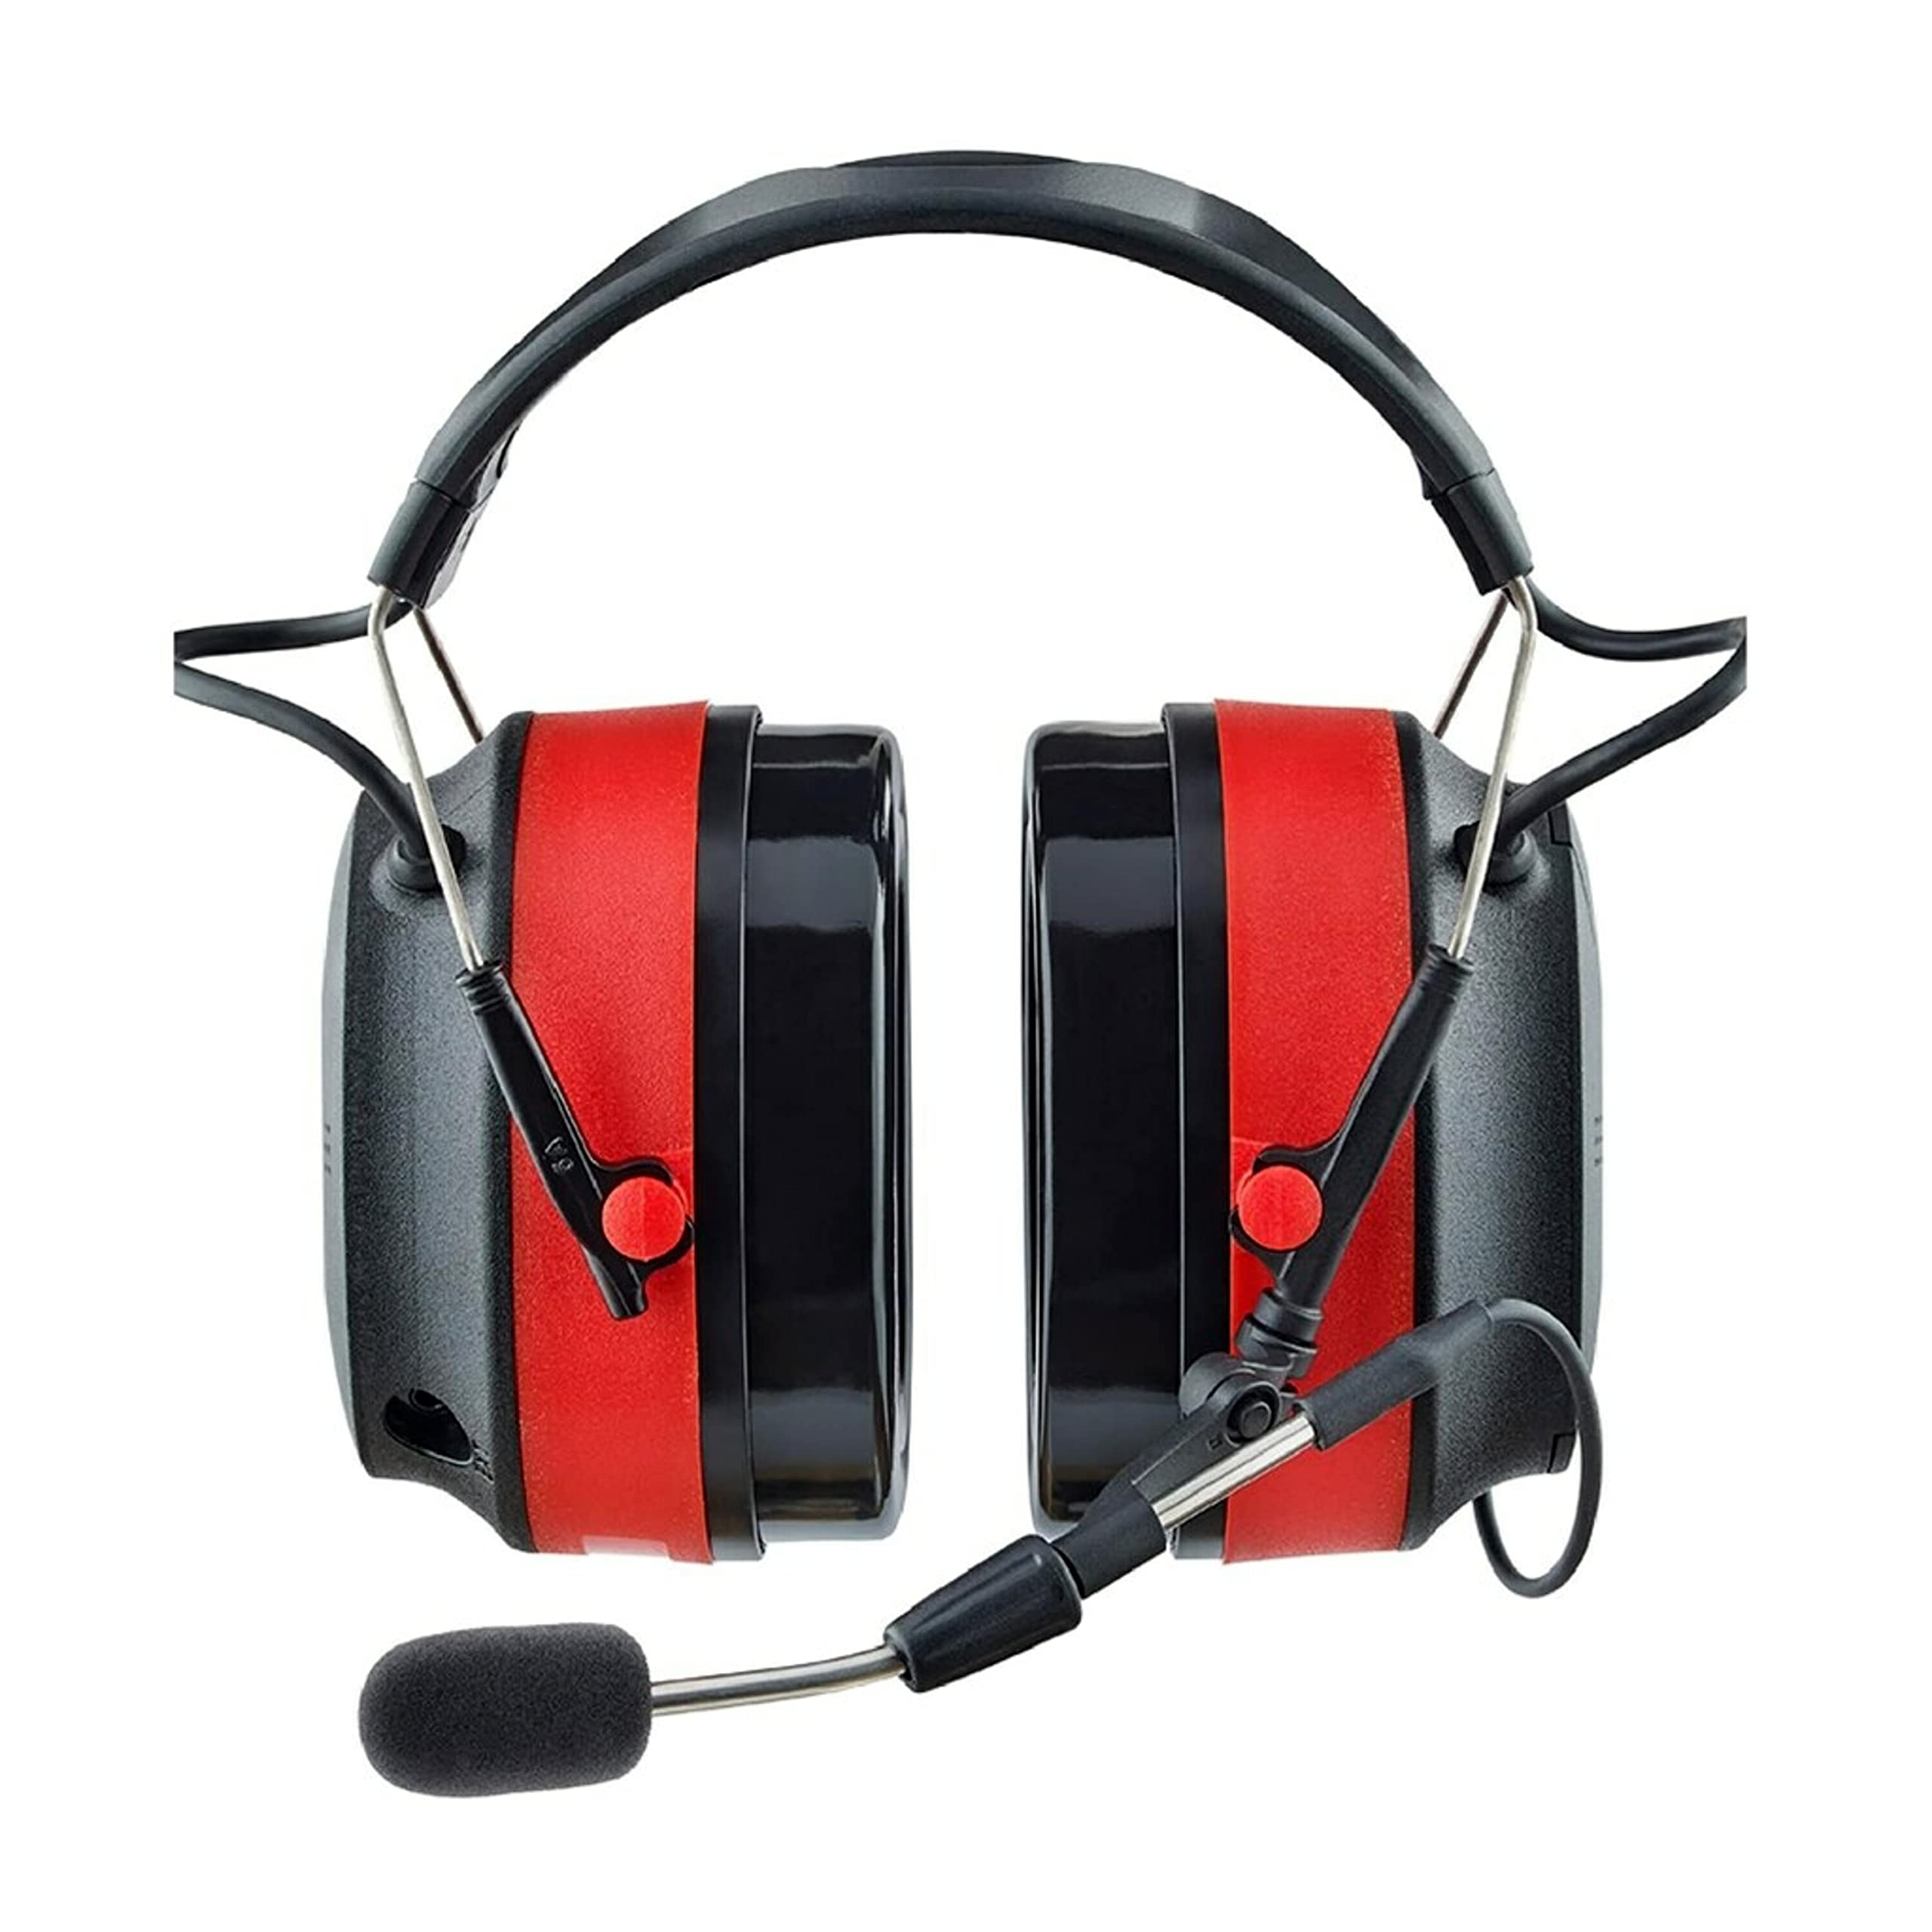 3M Pro-Comms Electronic Hearing Protection with Bluetooth Wireless Technology and External Microphones, Bluetooth Headphones, NRR 26 dB,Black/Red